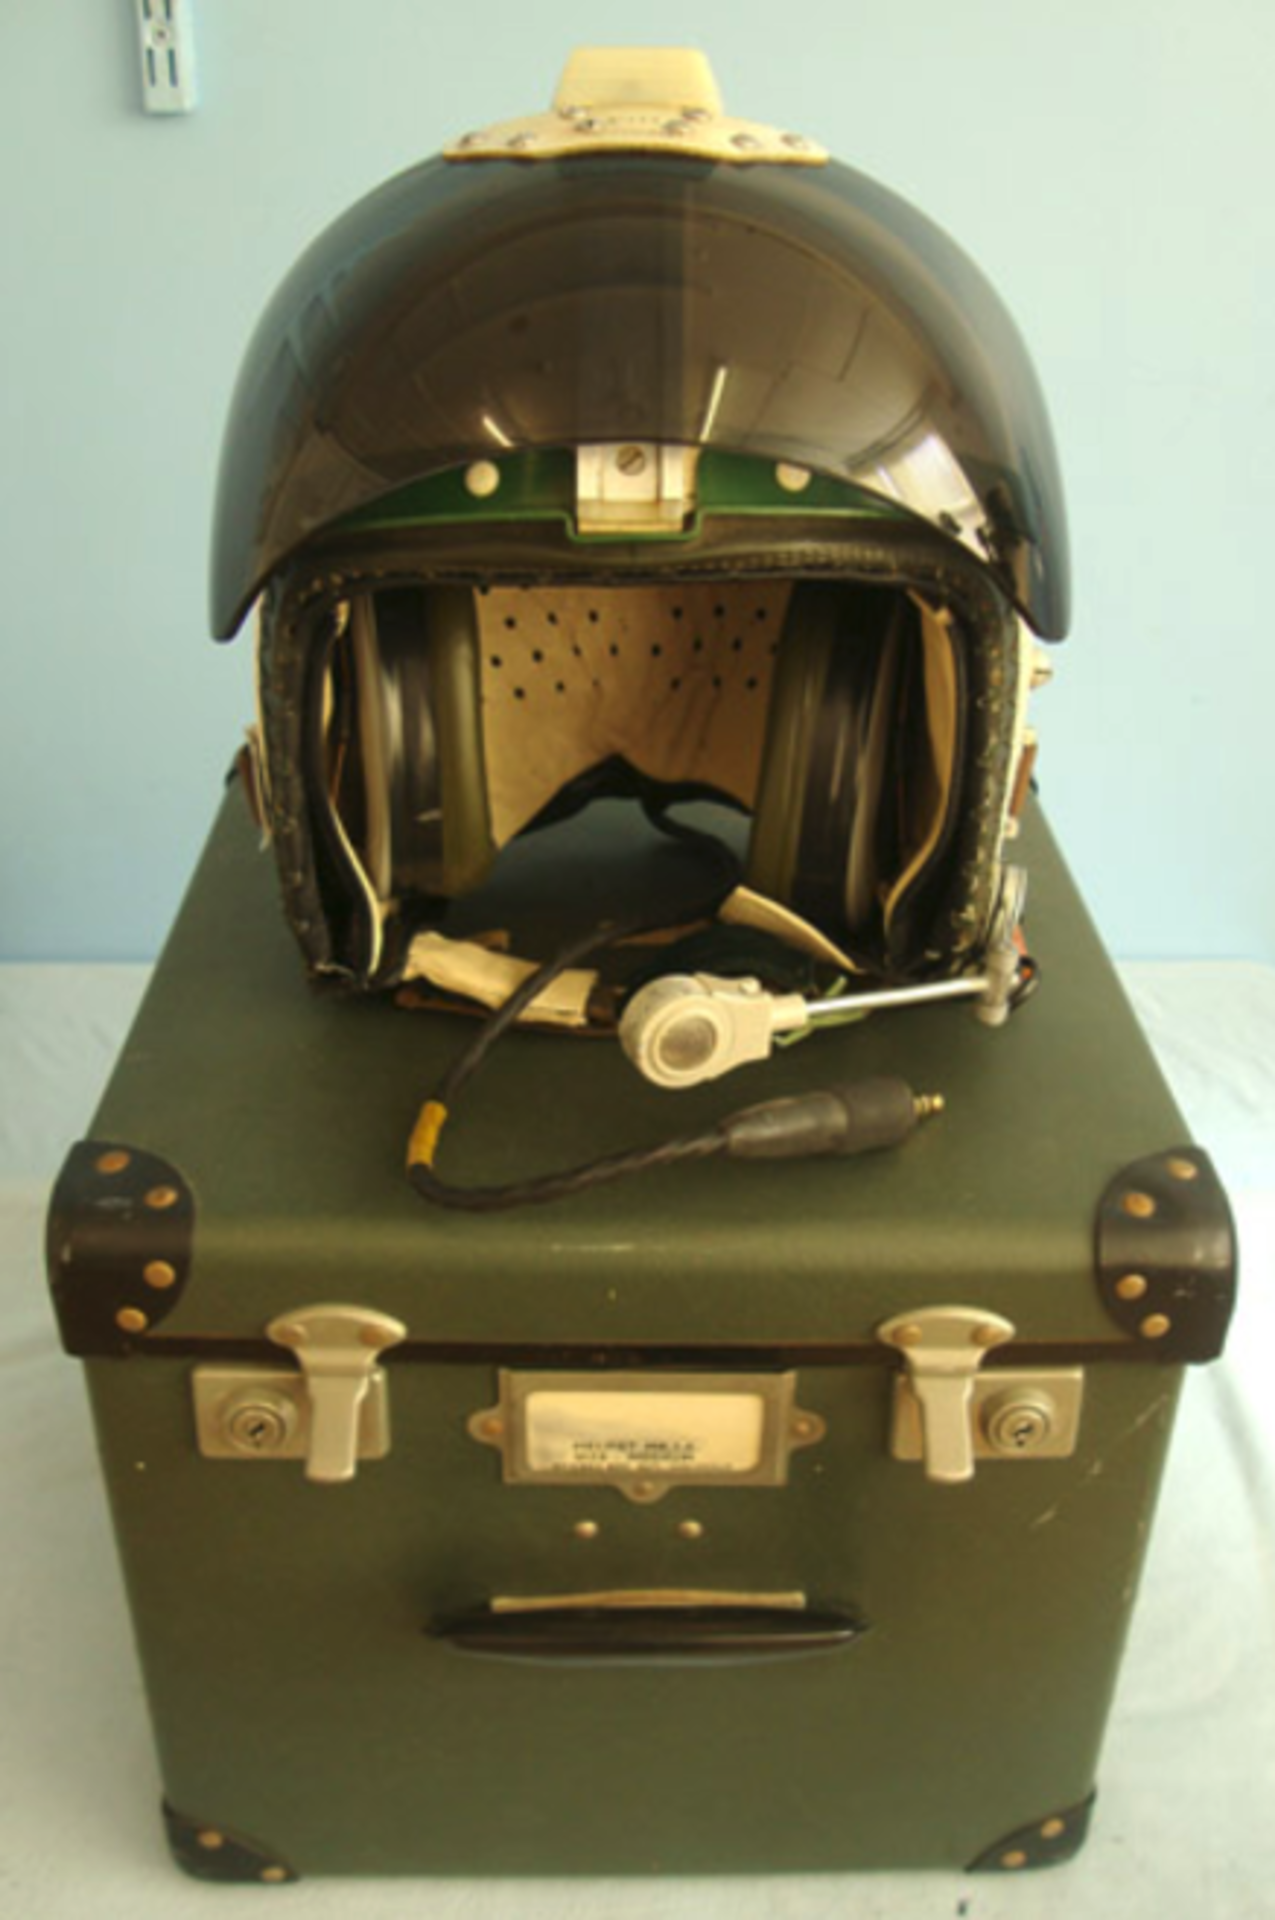 British R.A.F. Flying Helmet 'Bonedome' MK. 3A Complete with Visor, Headset, Mic and Issue Box